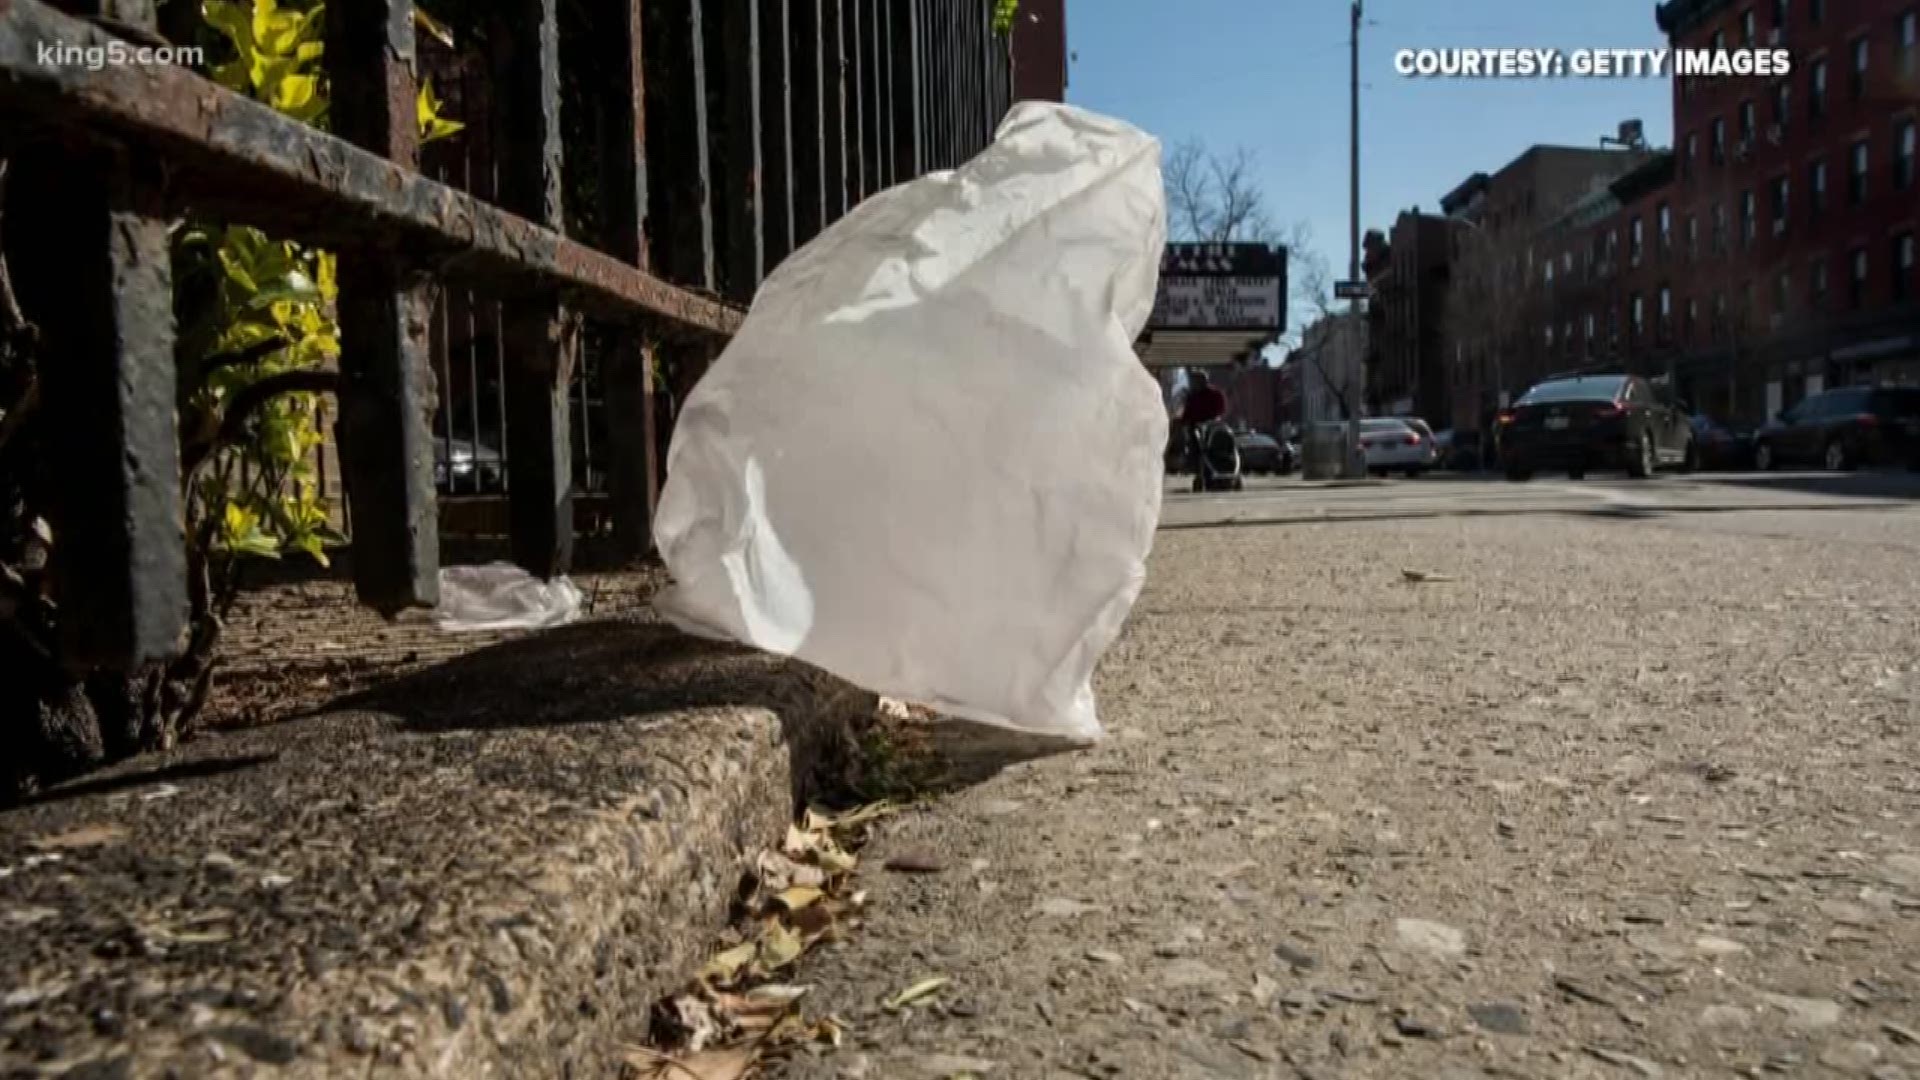 Some lawmakers in Olympia want to see a dramatic reduction in the use of single-use plastic bags at retailers across Washington state.